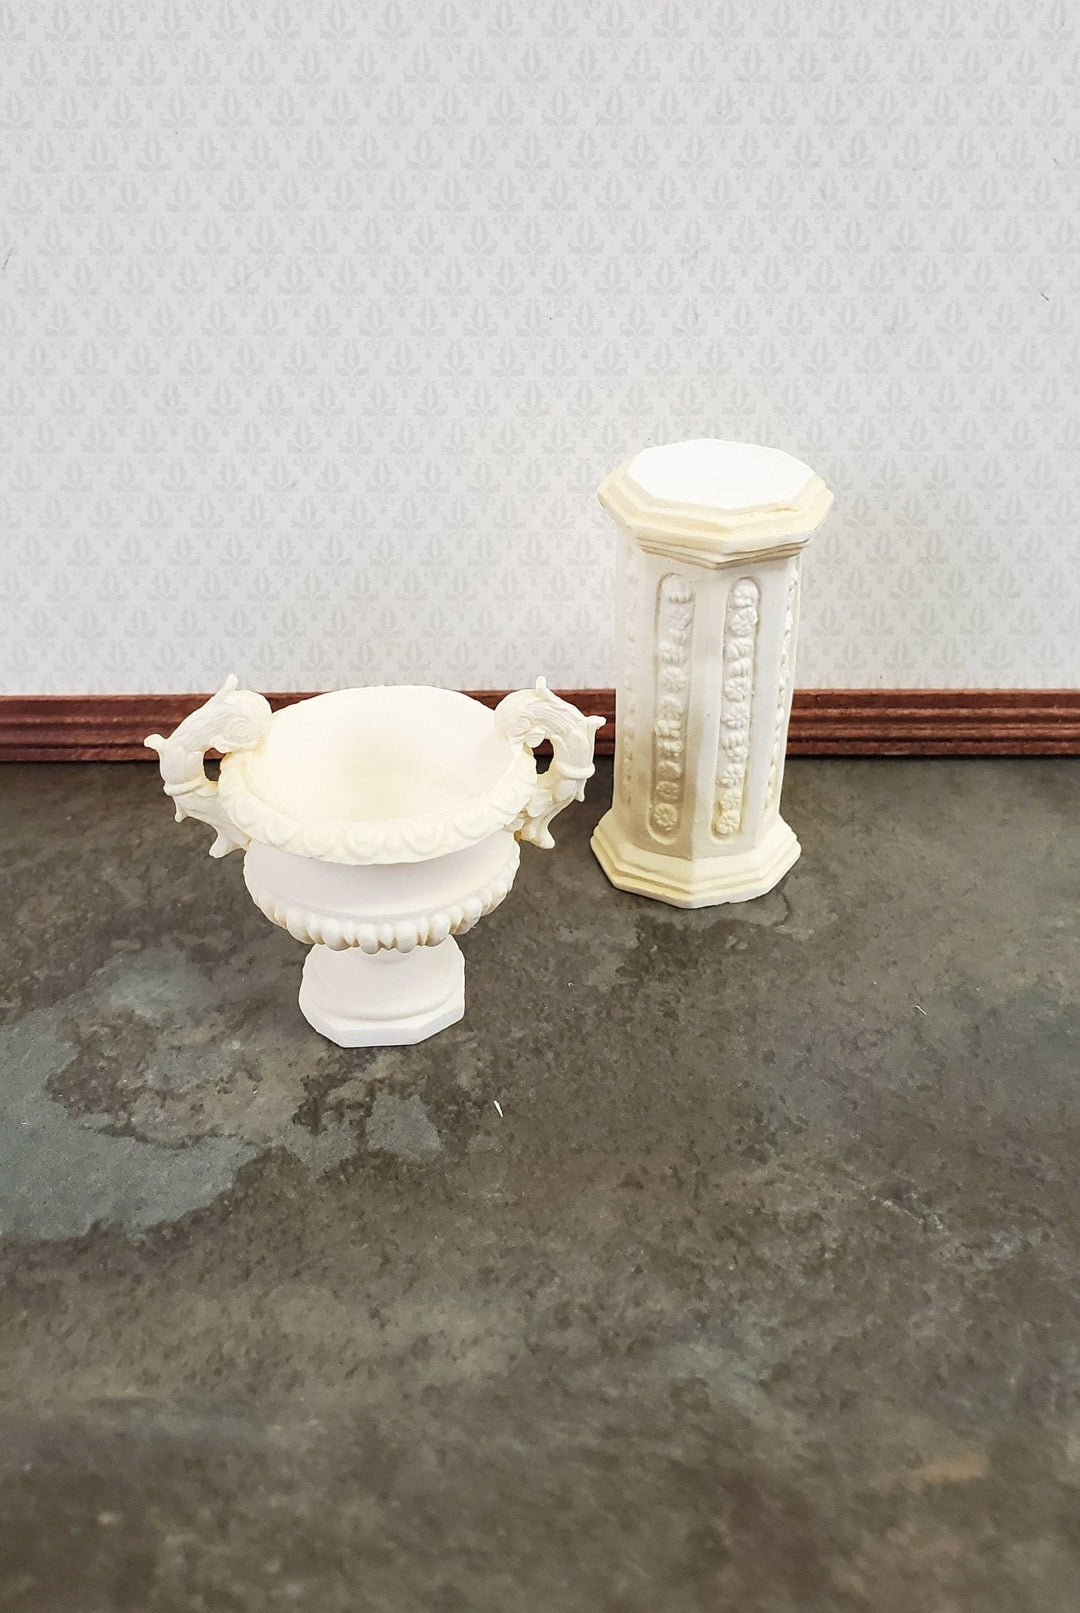 Dollhouse Miniature Pedestal Plant Stand w/ 2 Handled Urn Cast Resin 1:12 Scale Ivory - Miniature Crush